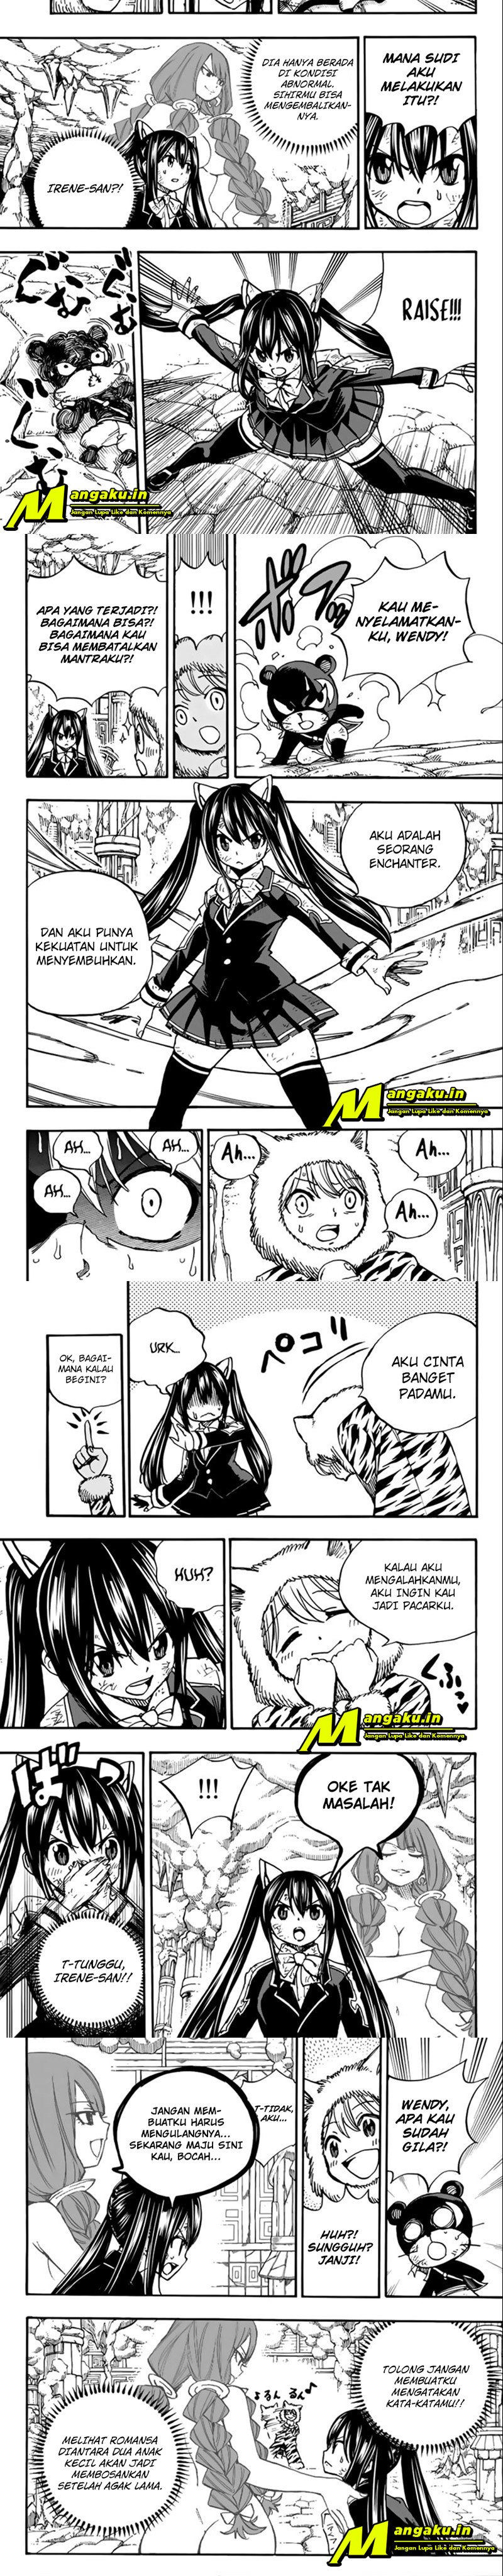 Fairy Tail 100 Years Quest Chapter 97